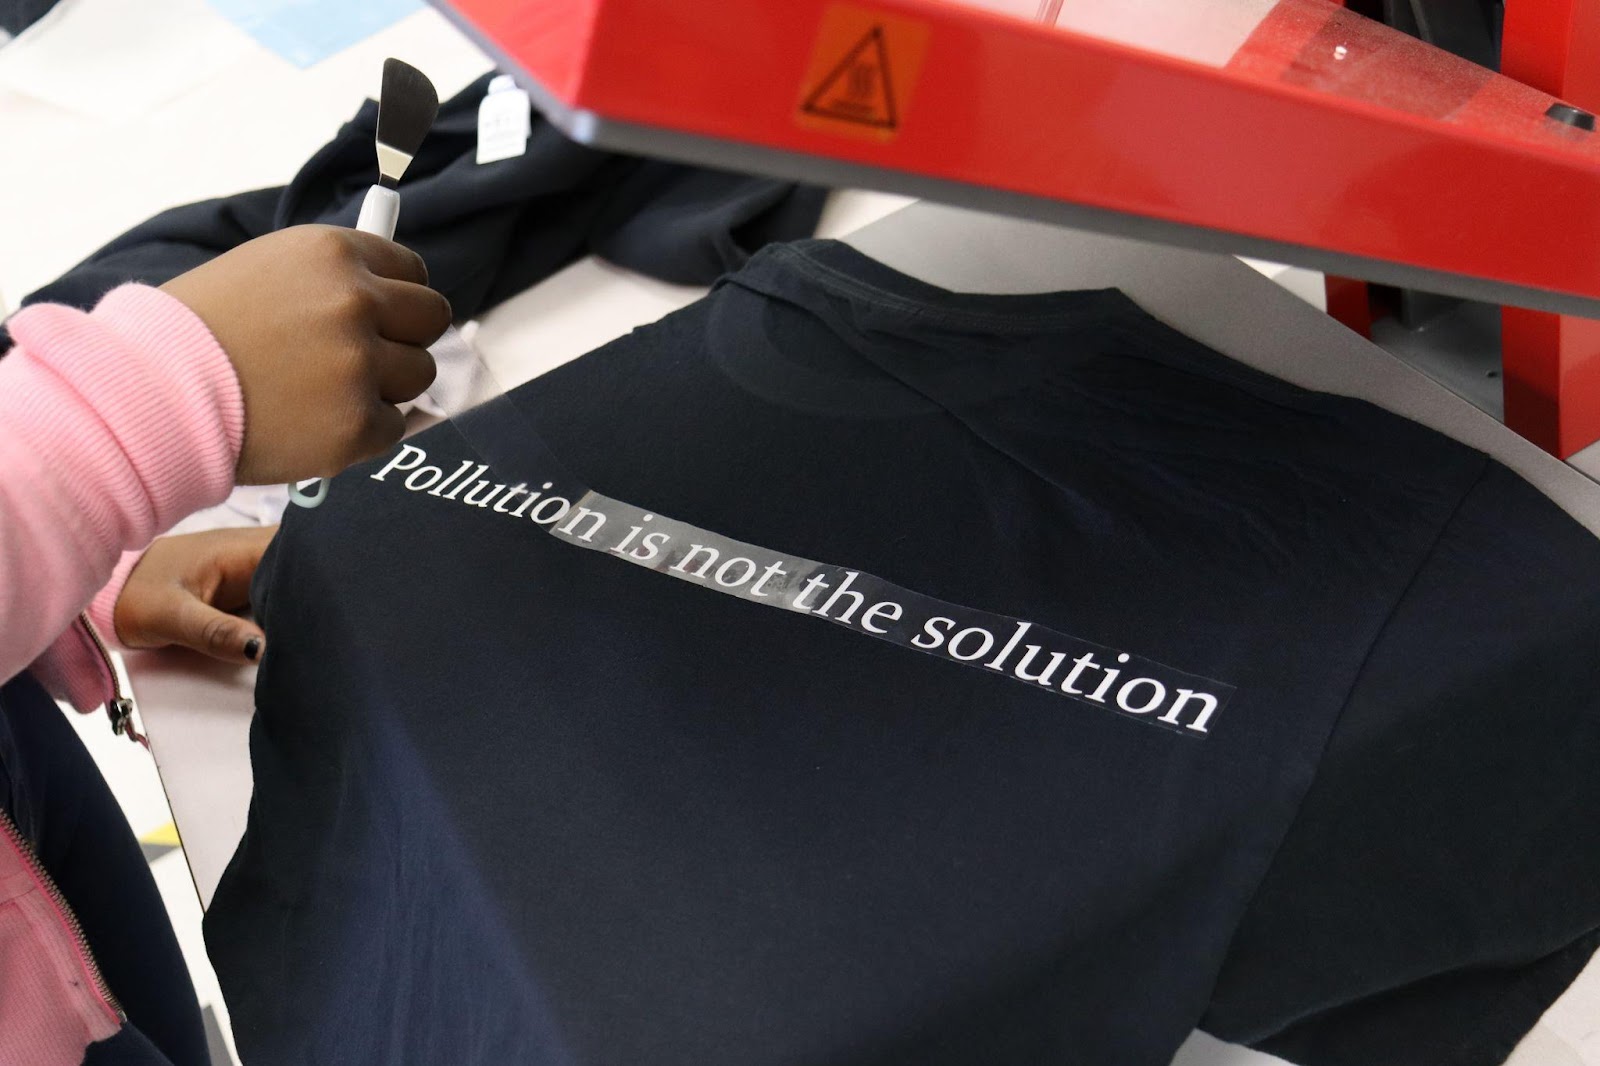 T-Shirt printed with "Pollution is not the solution" writing.